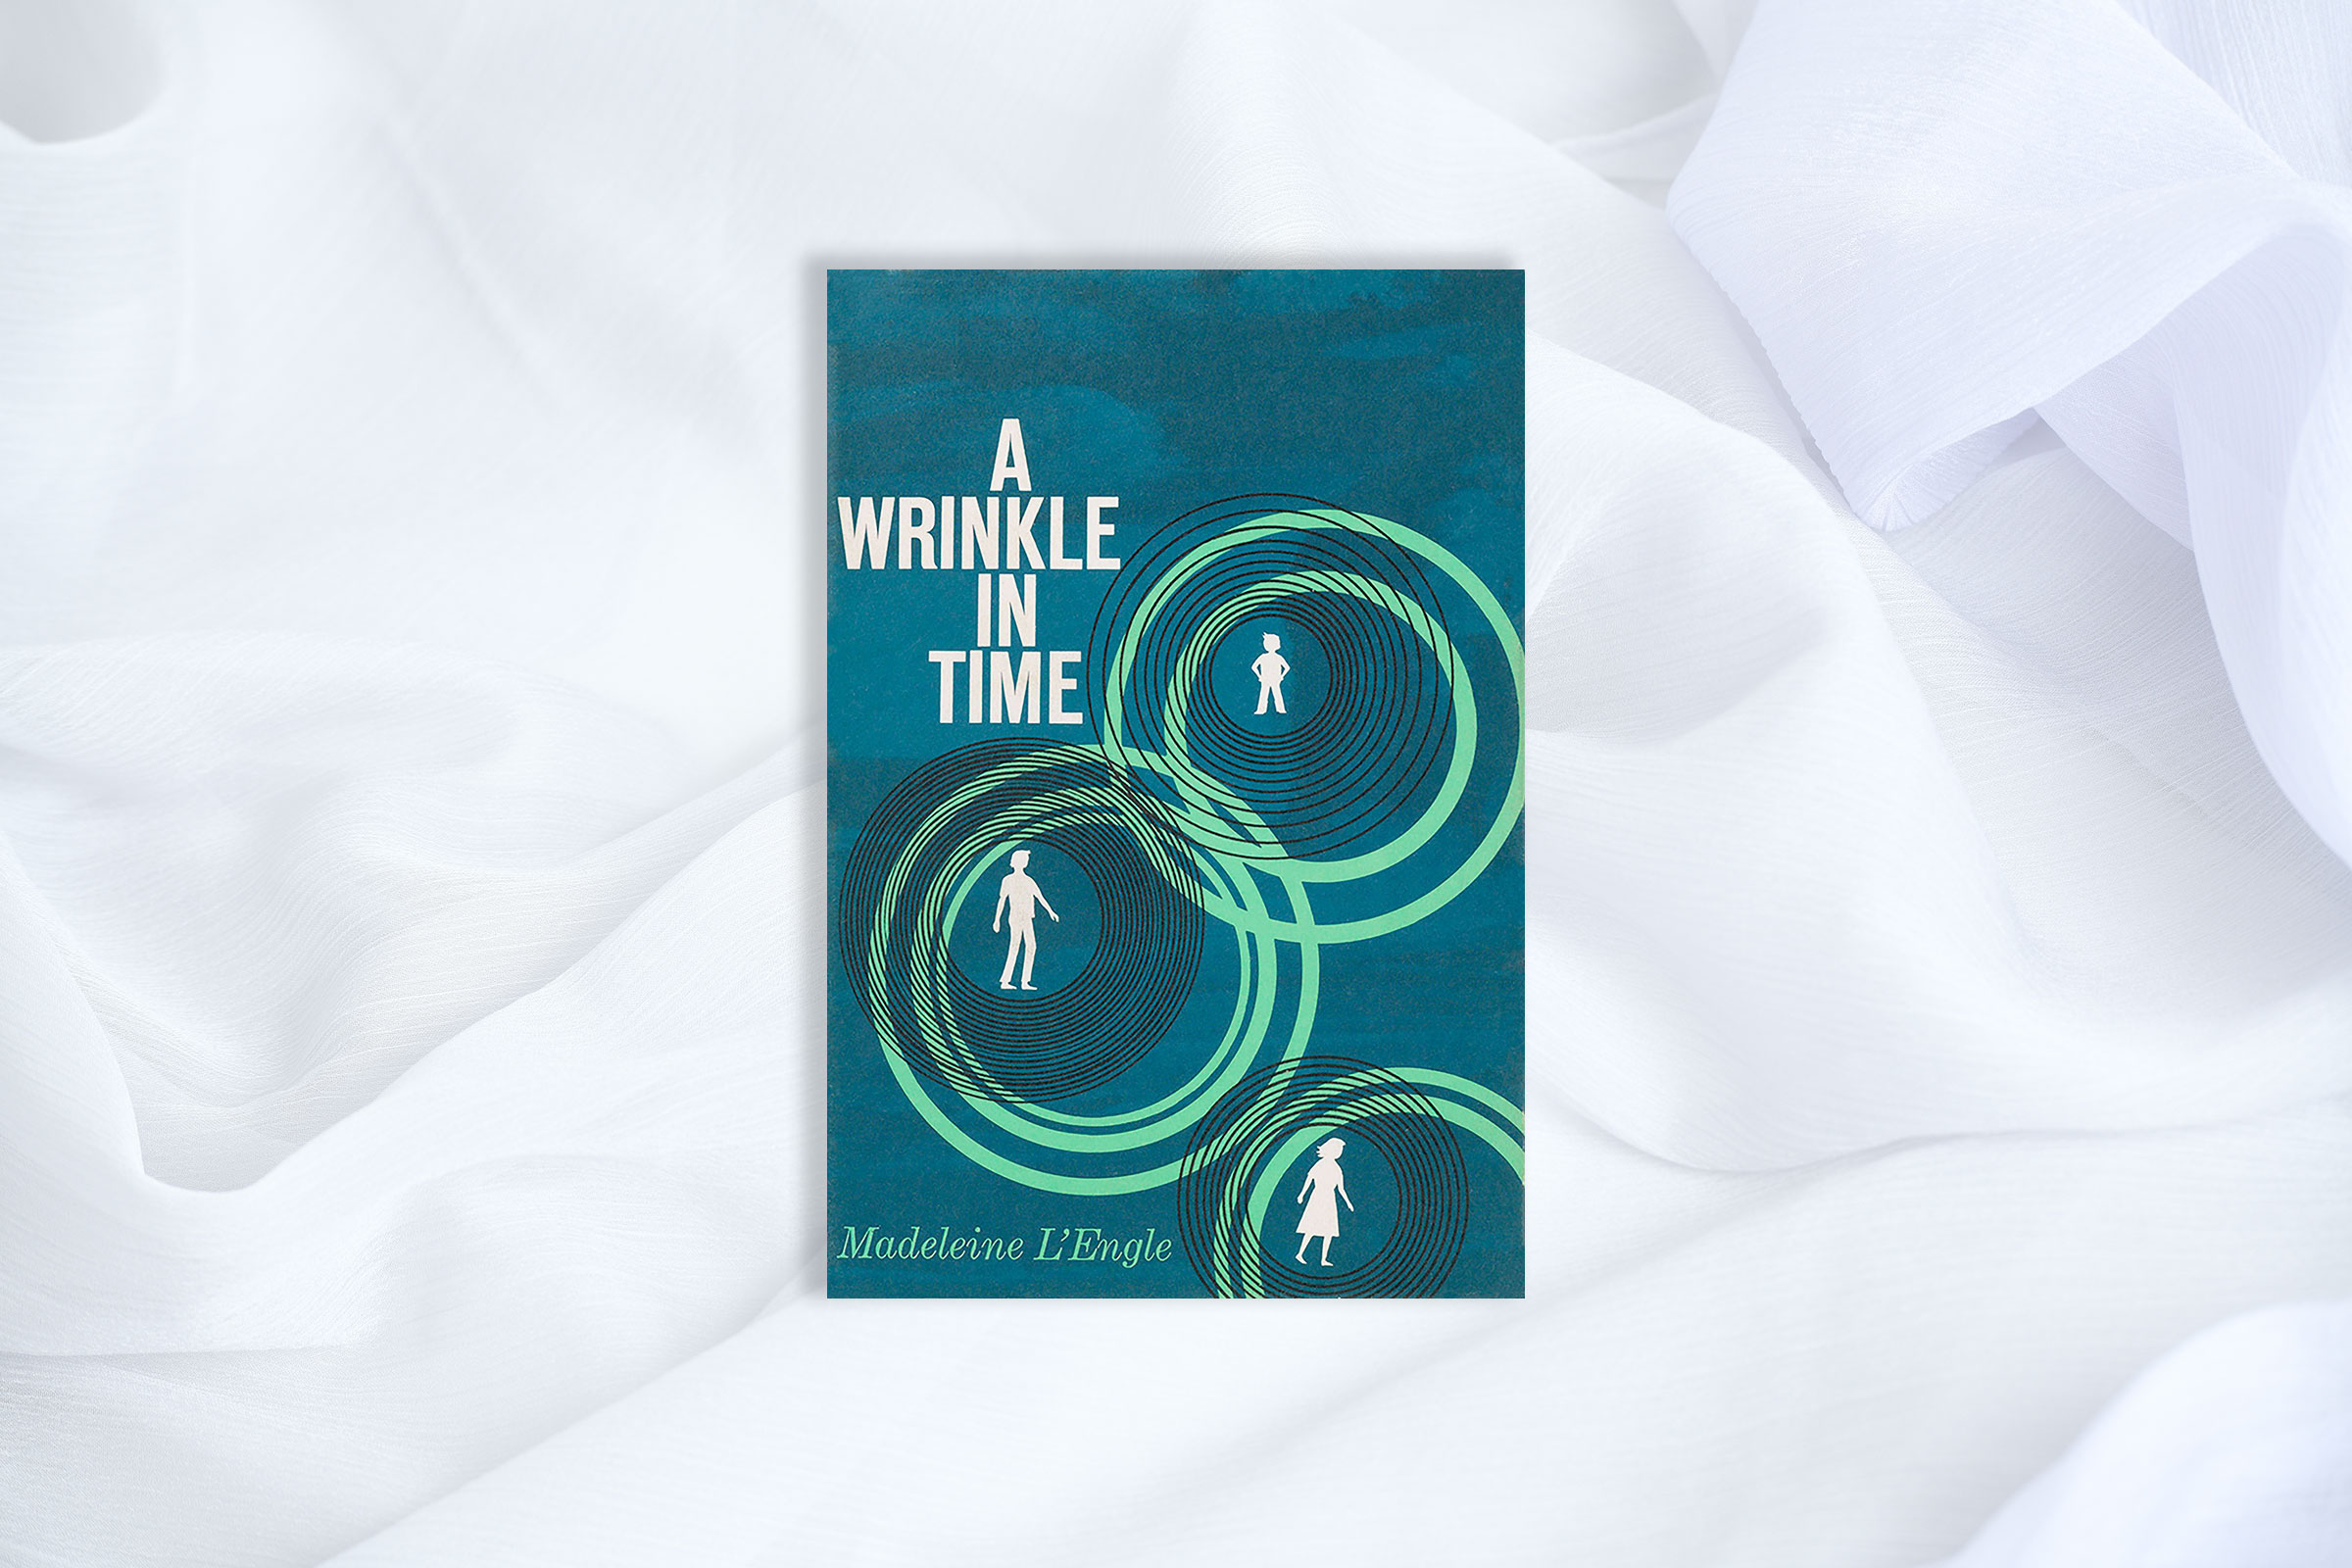 100 Best Fantasy Books: A Wrinkle in Time Madeleine LEngle